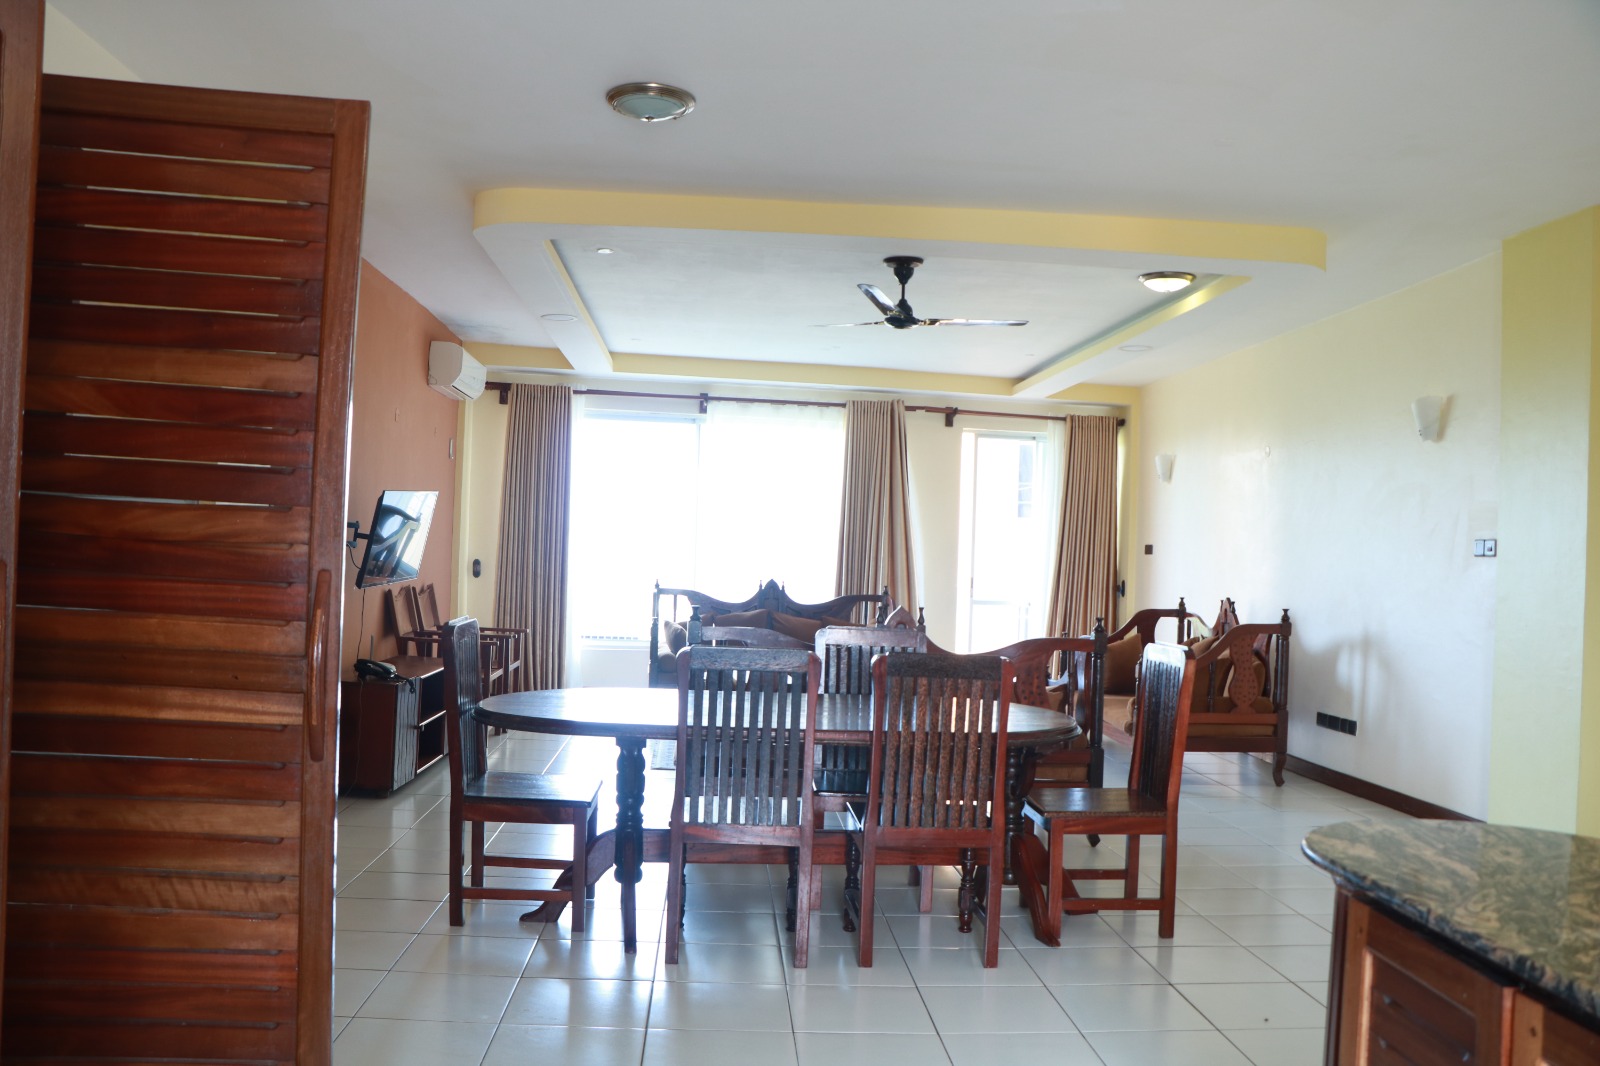 Family suite 2-bedrooom apartment in Mombasa Pirat. Affordable furnished Apartment for vacation in Mombasa | Zuru Life Africa